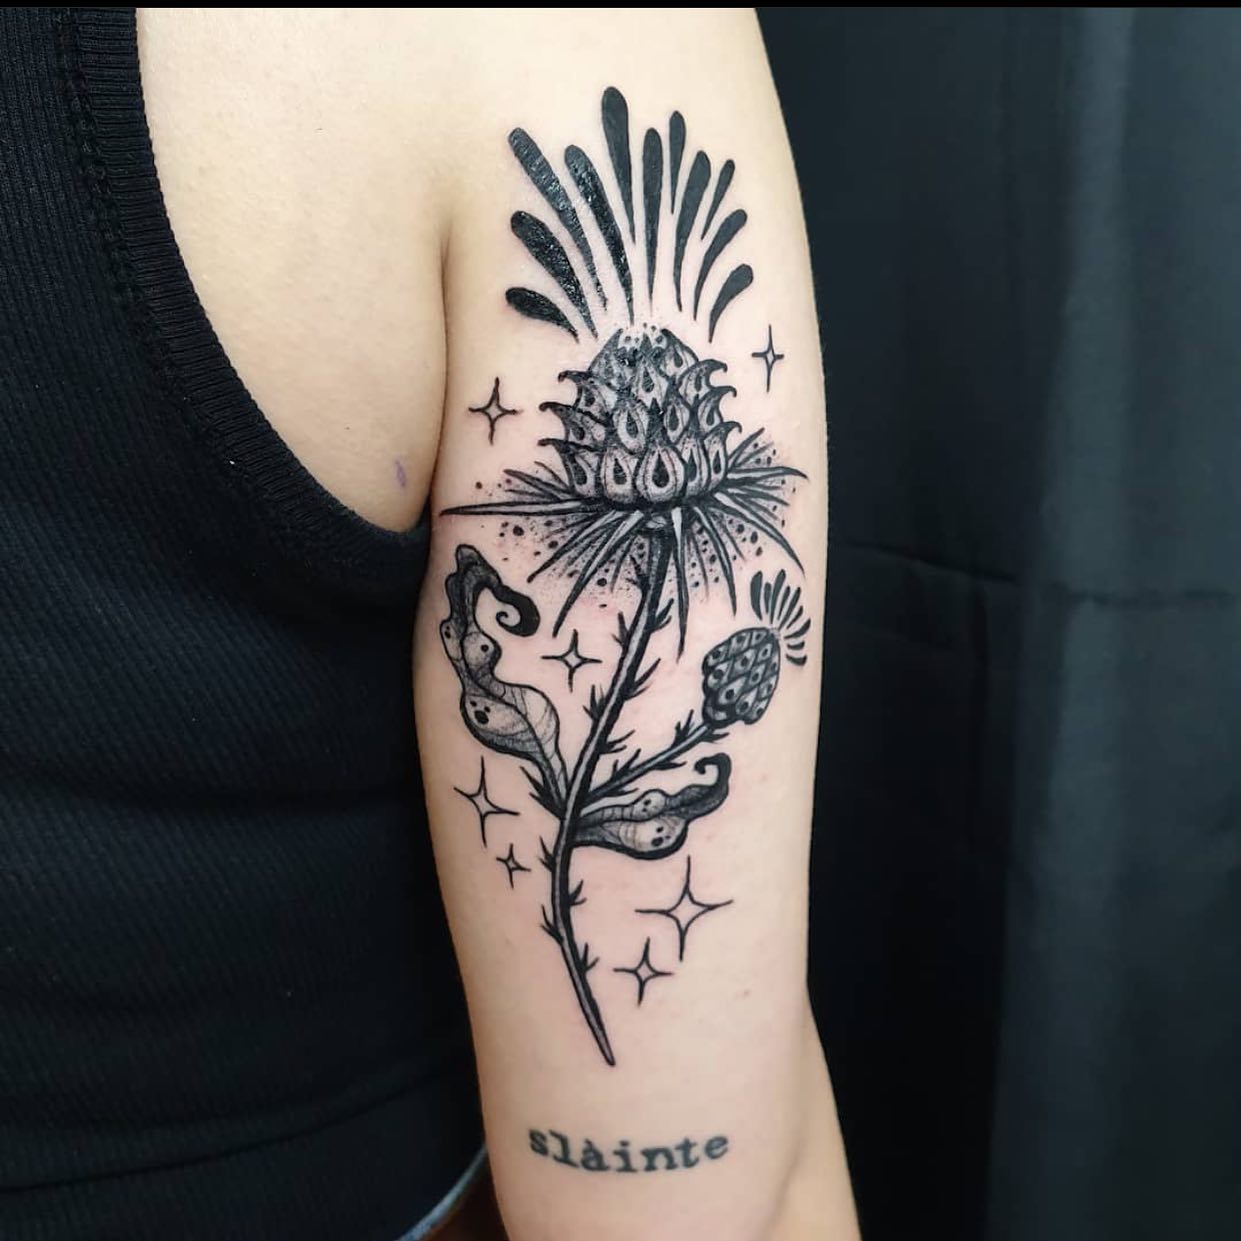 tattoo may be tattooing in Nantes, but she still gets thistle requests!  Scotland has followed her to France maybe France can now send us over the  right to open tattoo shops in